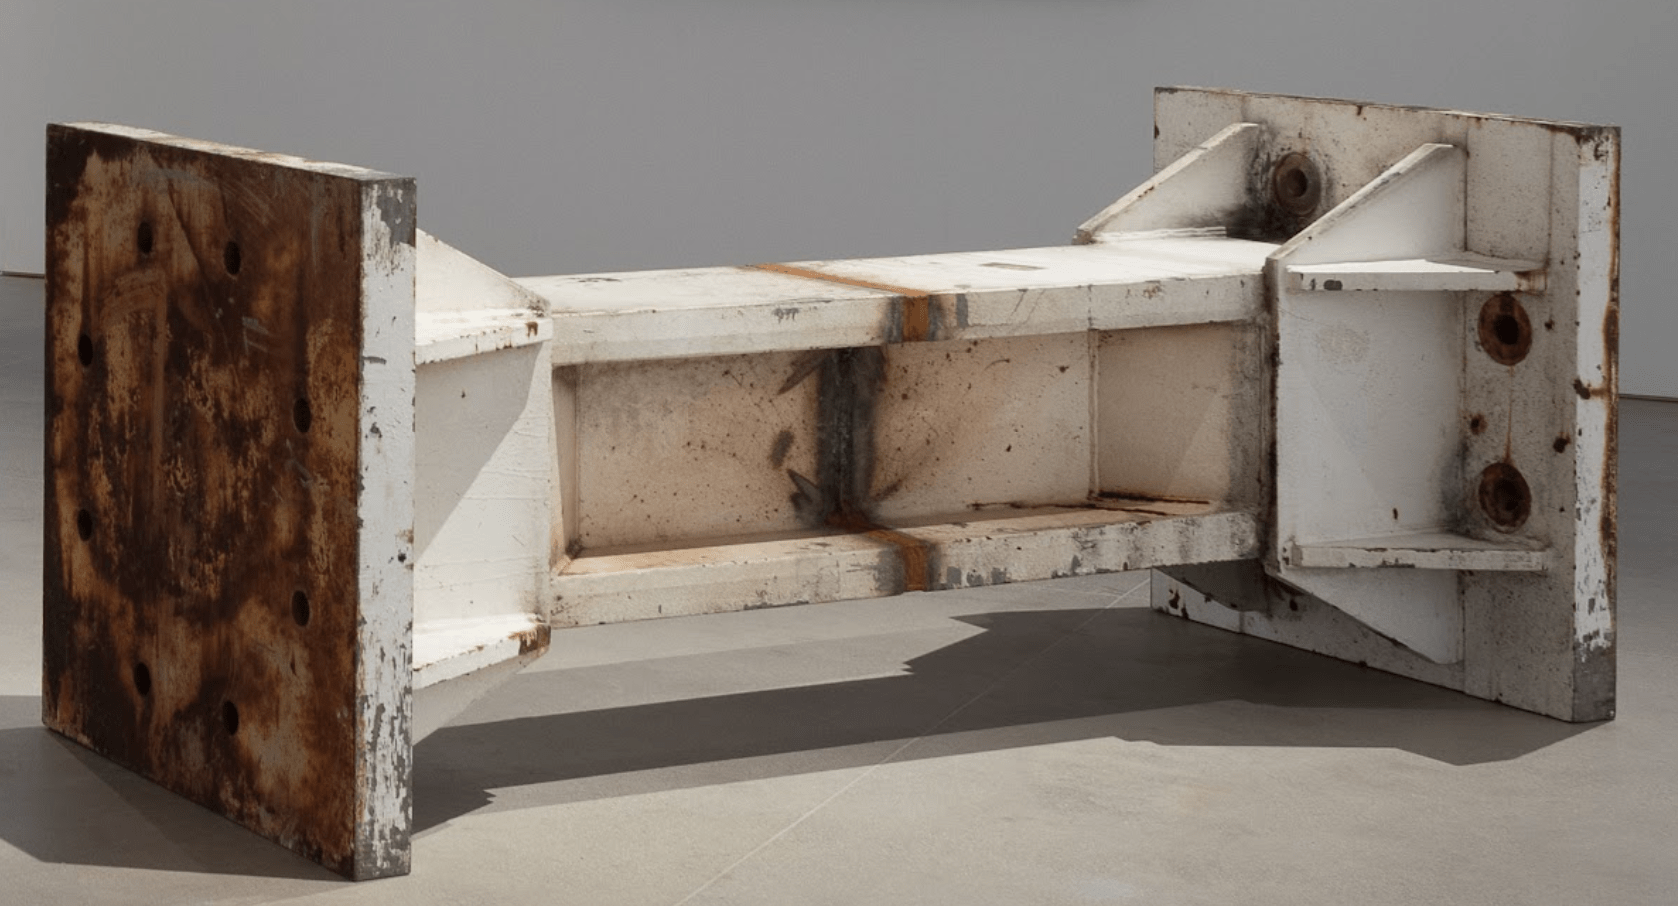 Theaster Gates
black seam on city infrastructure, 2022
Steel beam
39 &amp;times; 39 &amp;times; 96&amp;nbsp;⅛ in.
(99.1 &amp;times; 99.1 &amp;times; 244.2 cm)